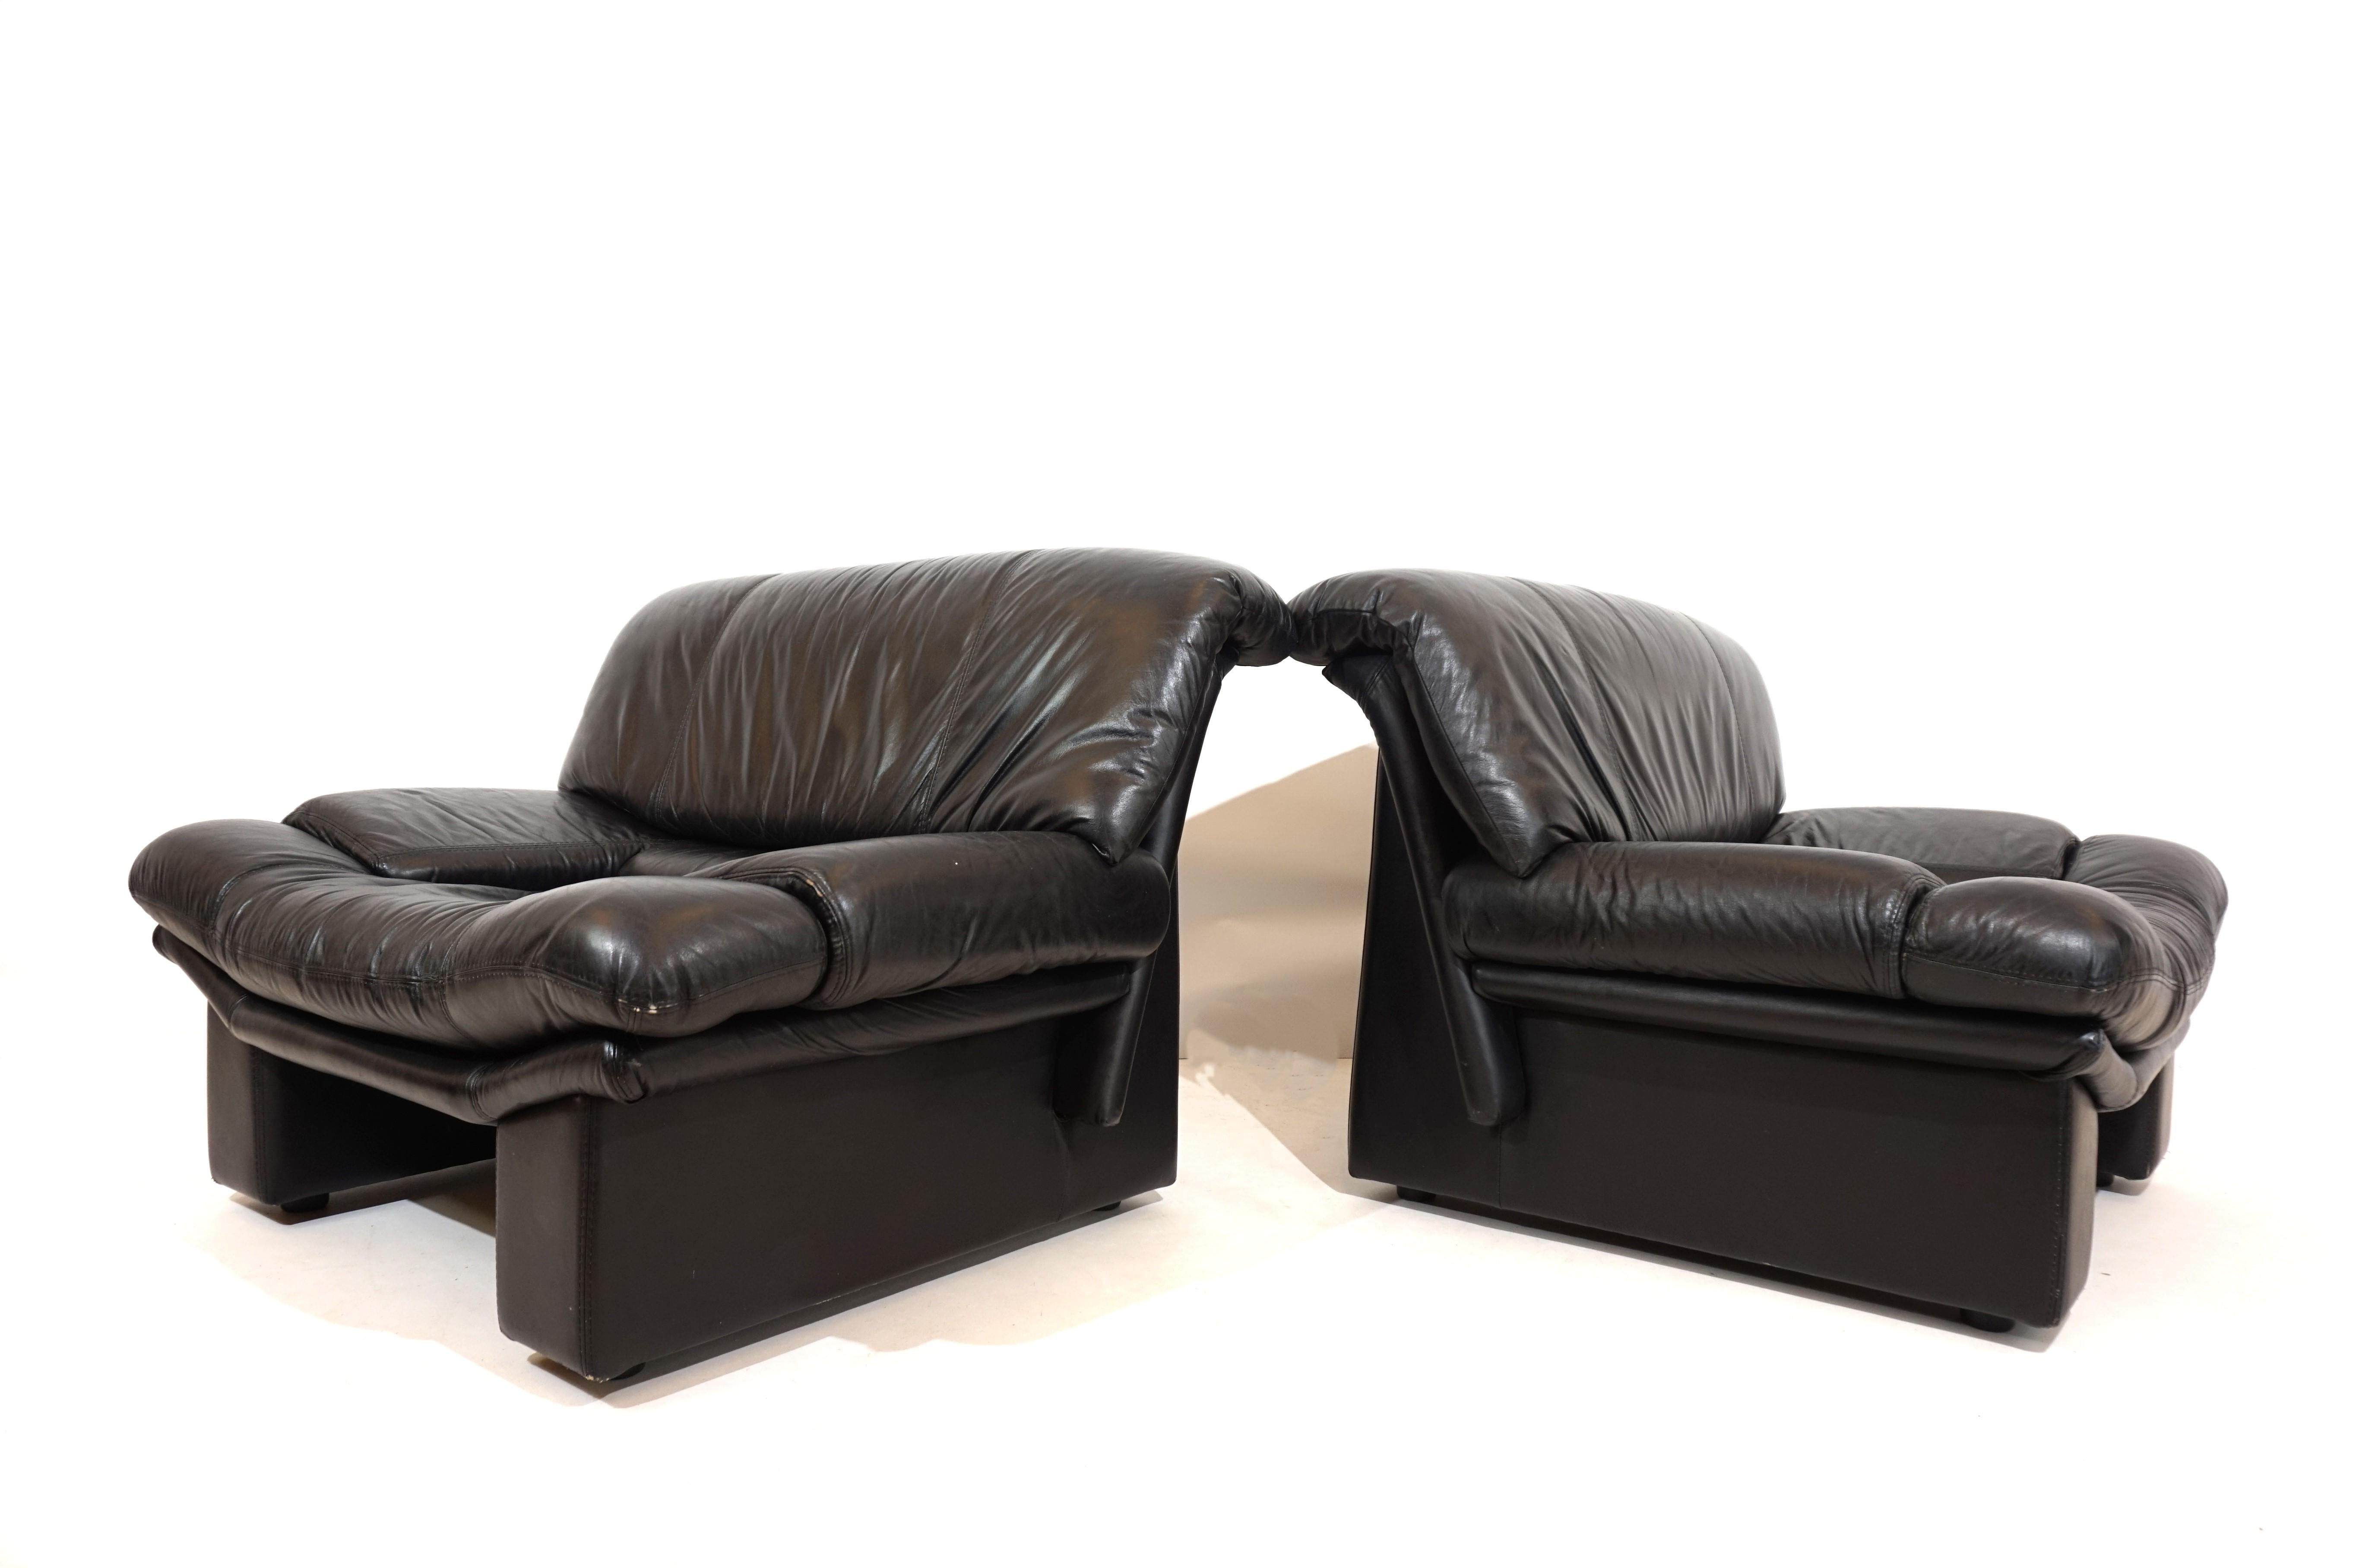 These two Ambassador leather chairs are in excellent condition. The soft black leather is flawless and shows only minimal signs of wear. The armchairs are characterized by the massive-looking columns on the back of the armchairs, which give them a